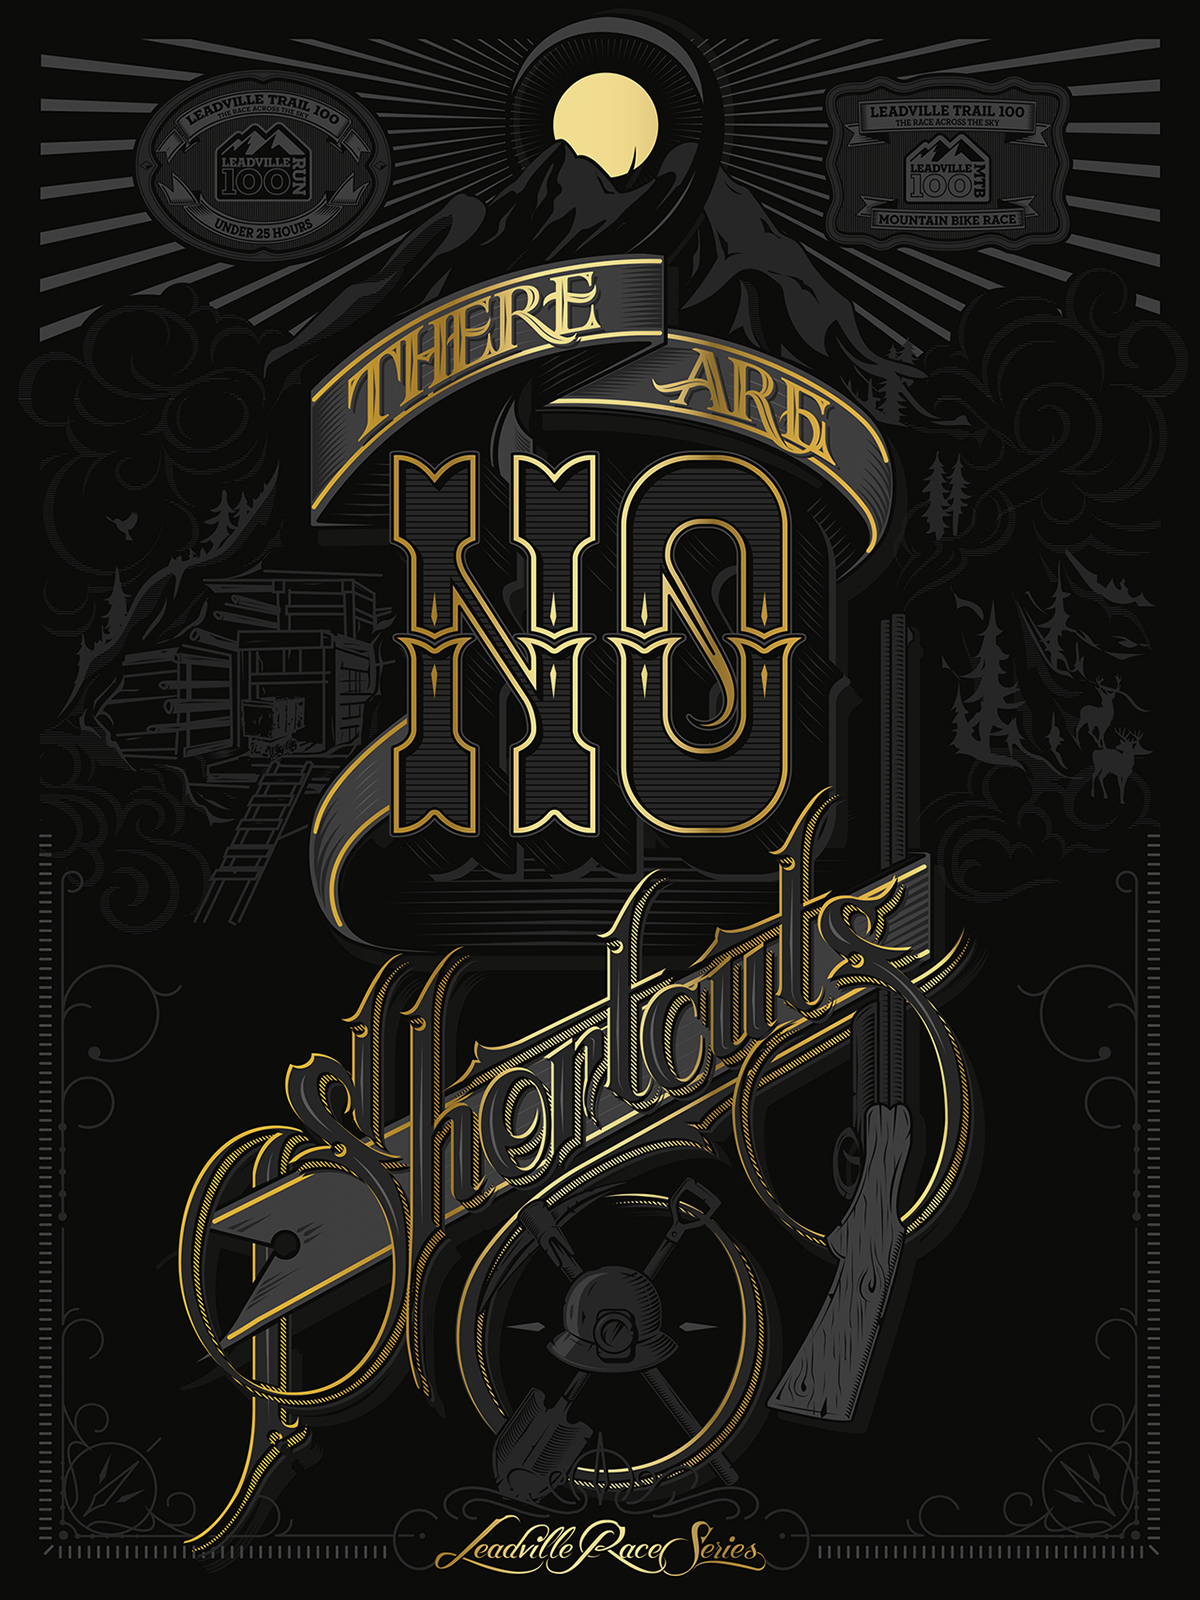 Martin schmetzer leadville leadville100 race series Poster Design typographic illustration vector There are no shortcuts print gold foiling HAND LETTERING lettering type